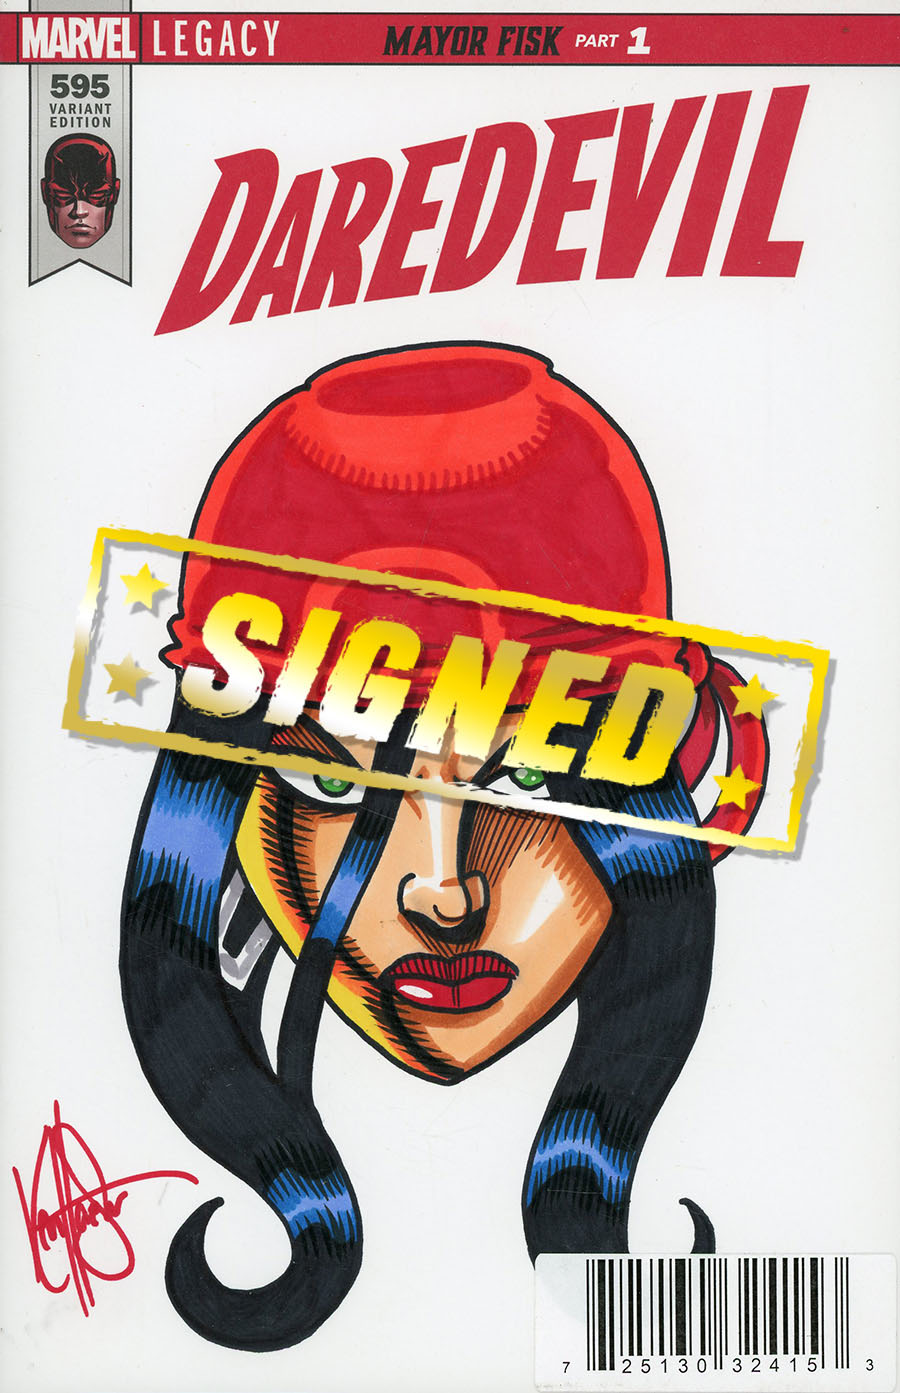 Daredevil Vol 5 #595 Cover J DF Signed & Remarked Commissioned Cover Art By Ken Haeser With An Elektra Hand-Drawn Sketch